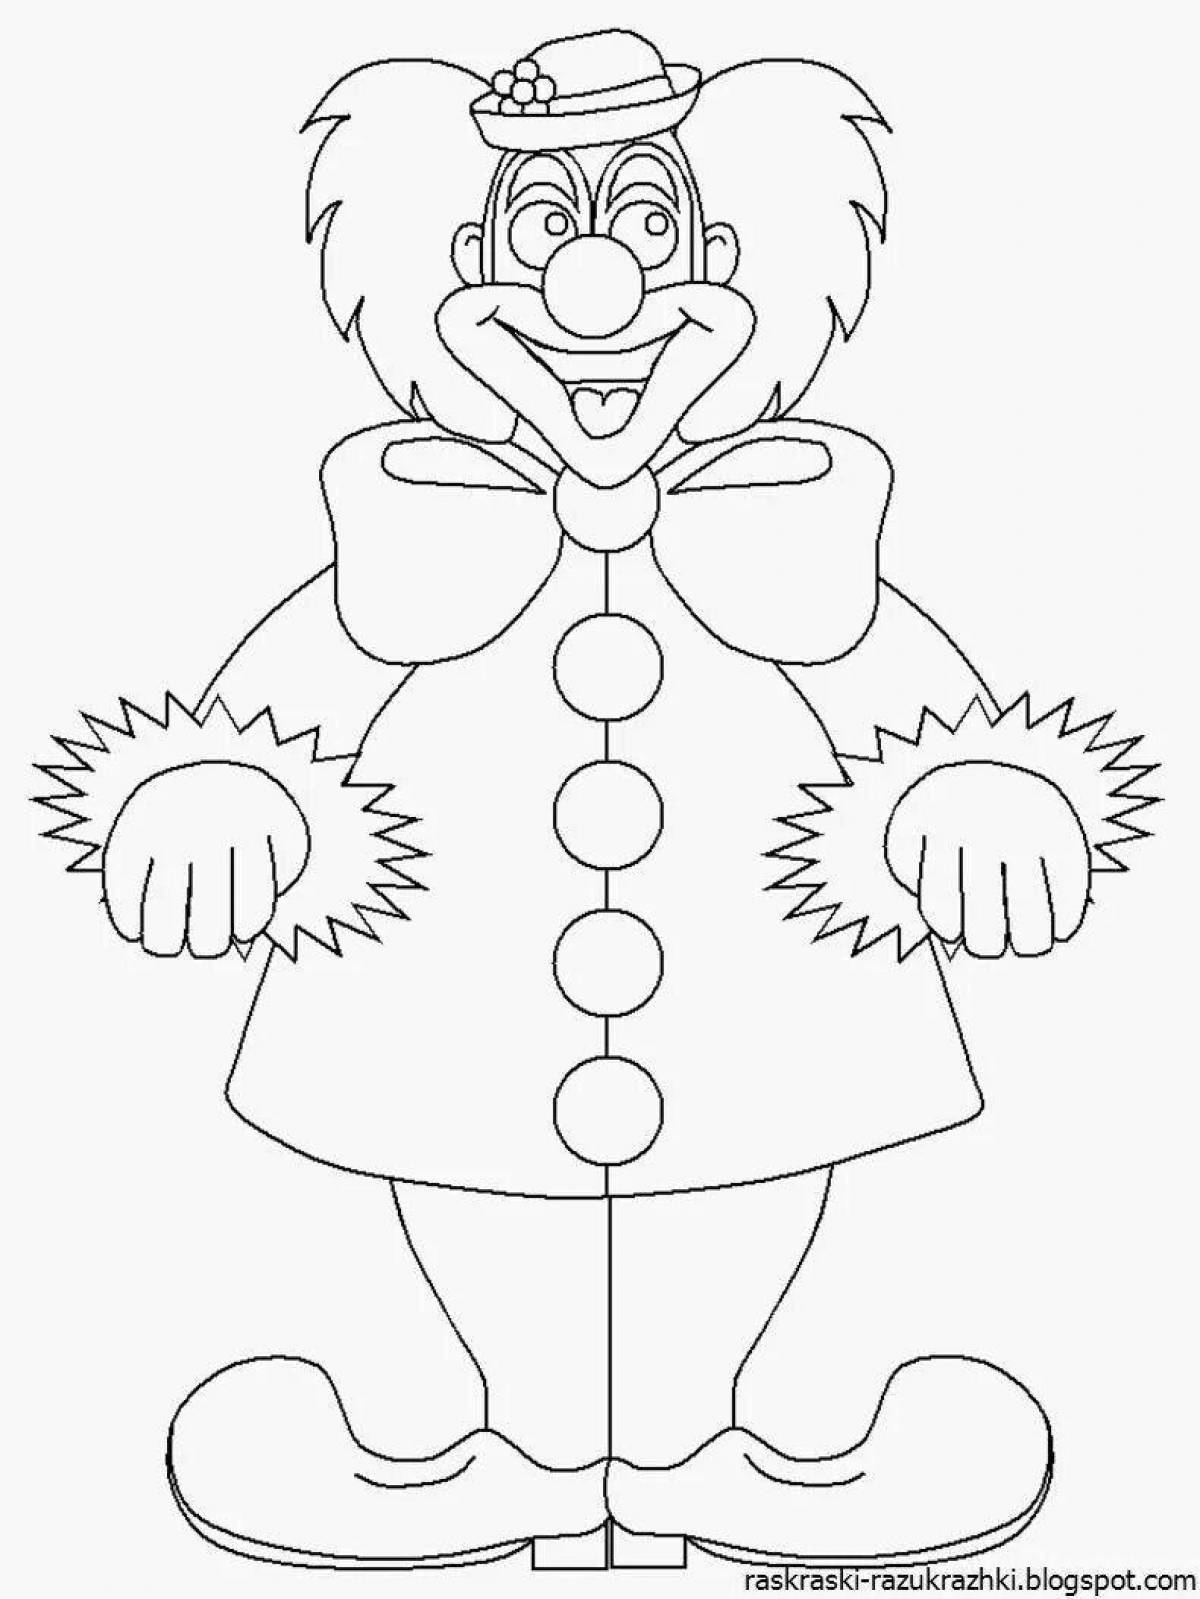 Bright drawing of a clown